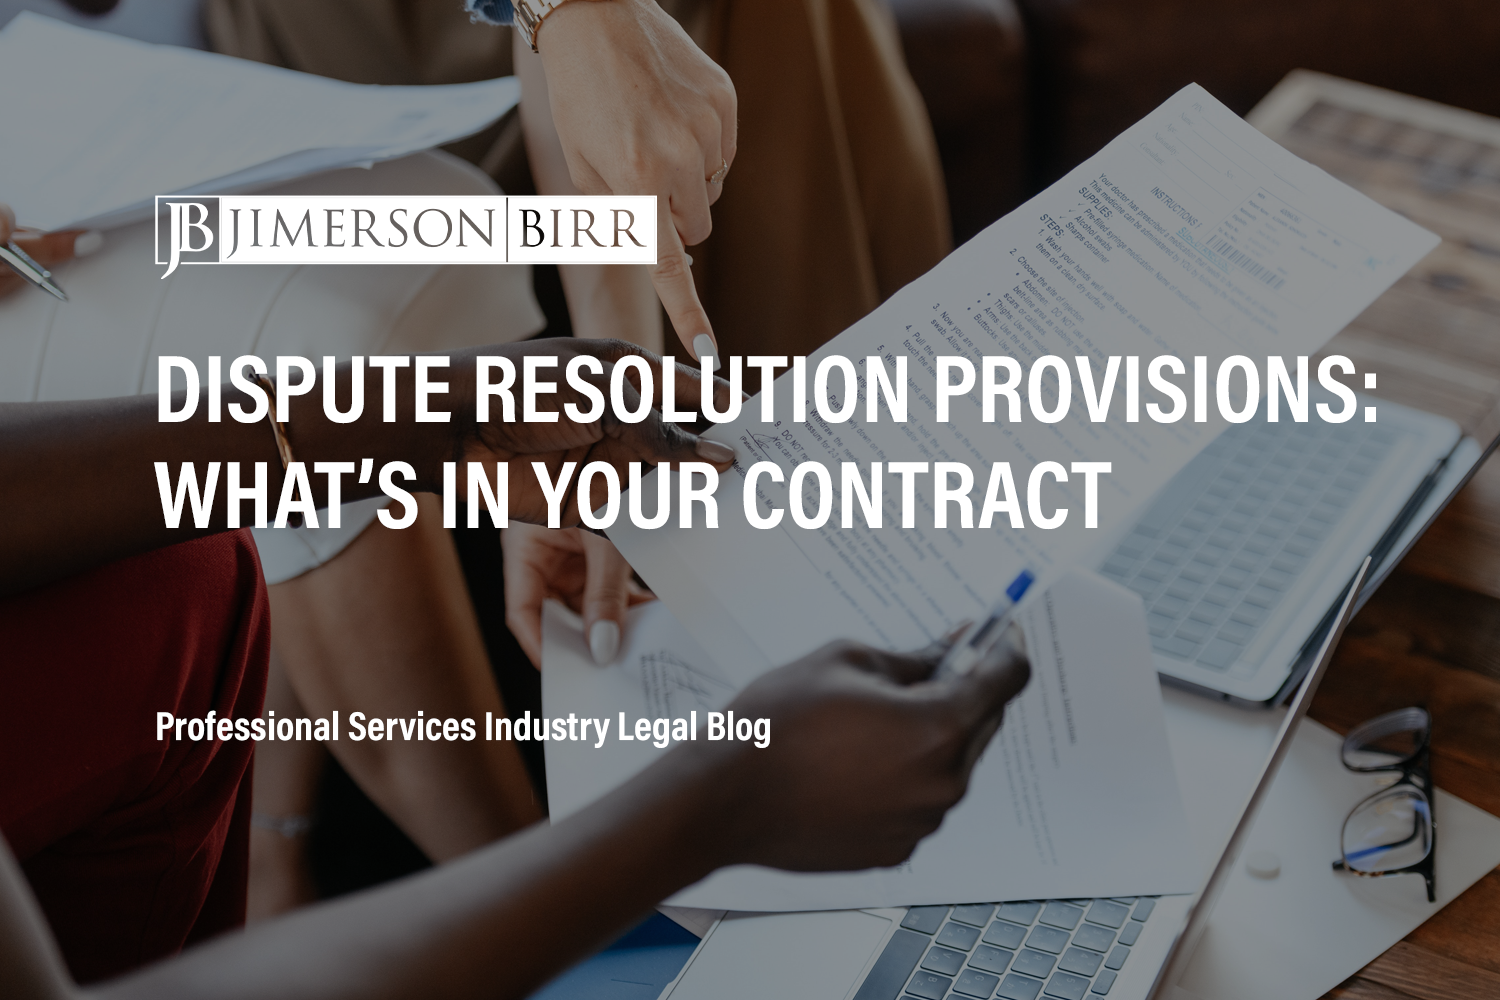 Dispute resolution provisions: What’s in your contract